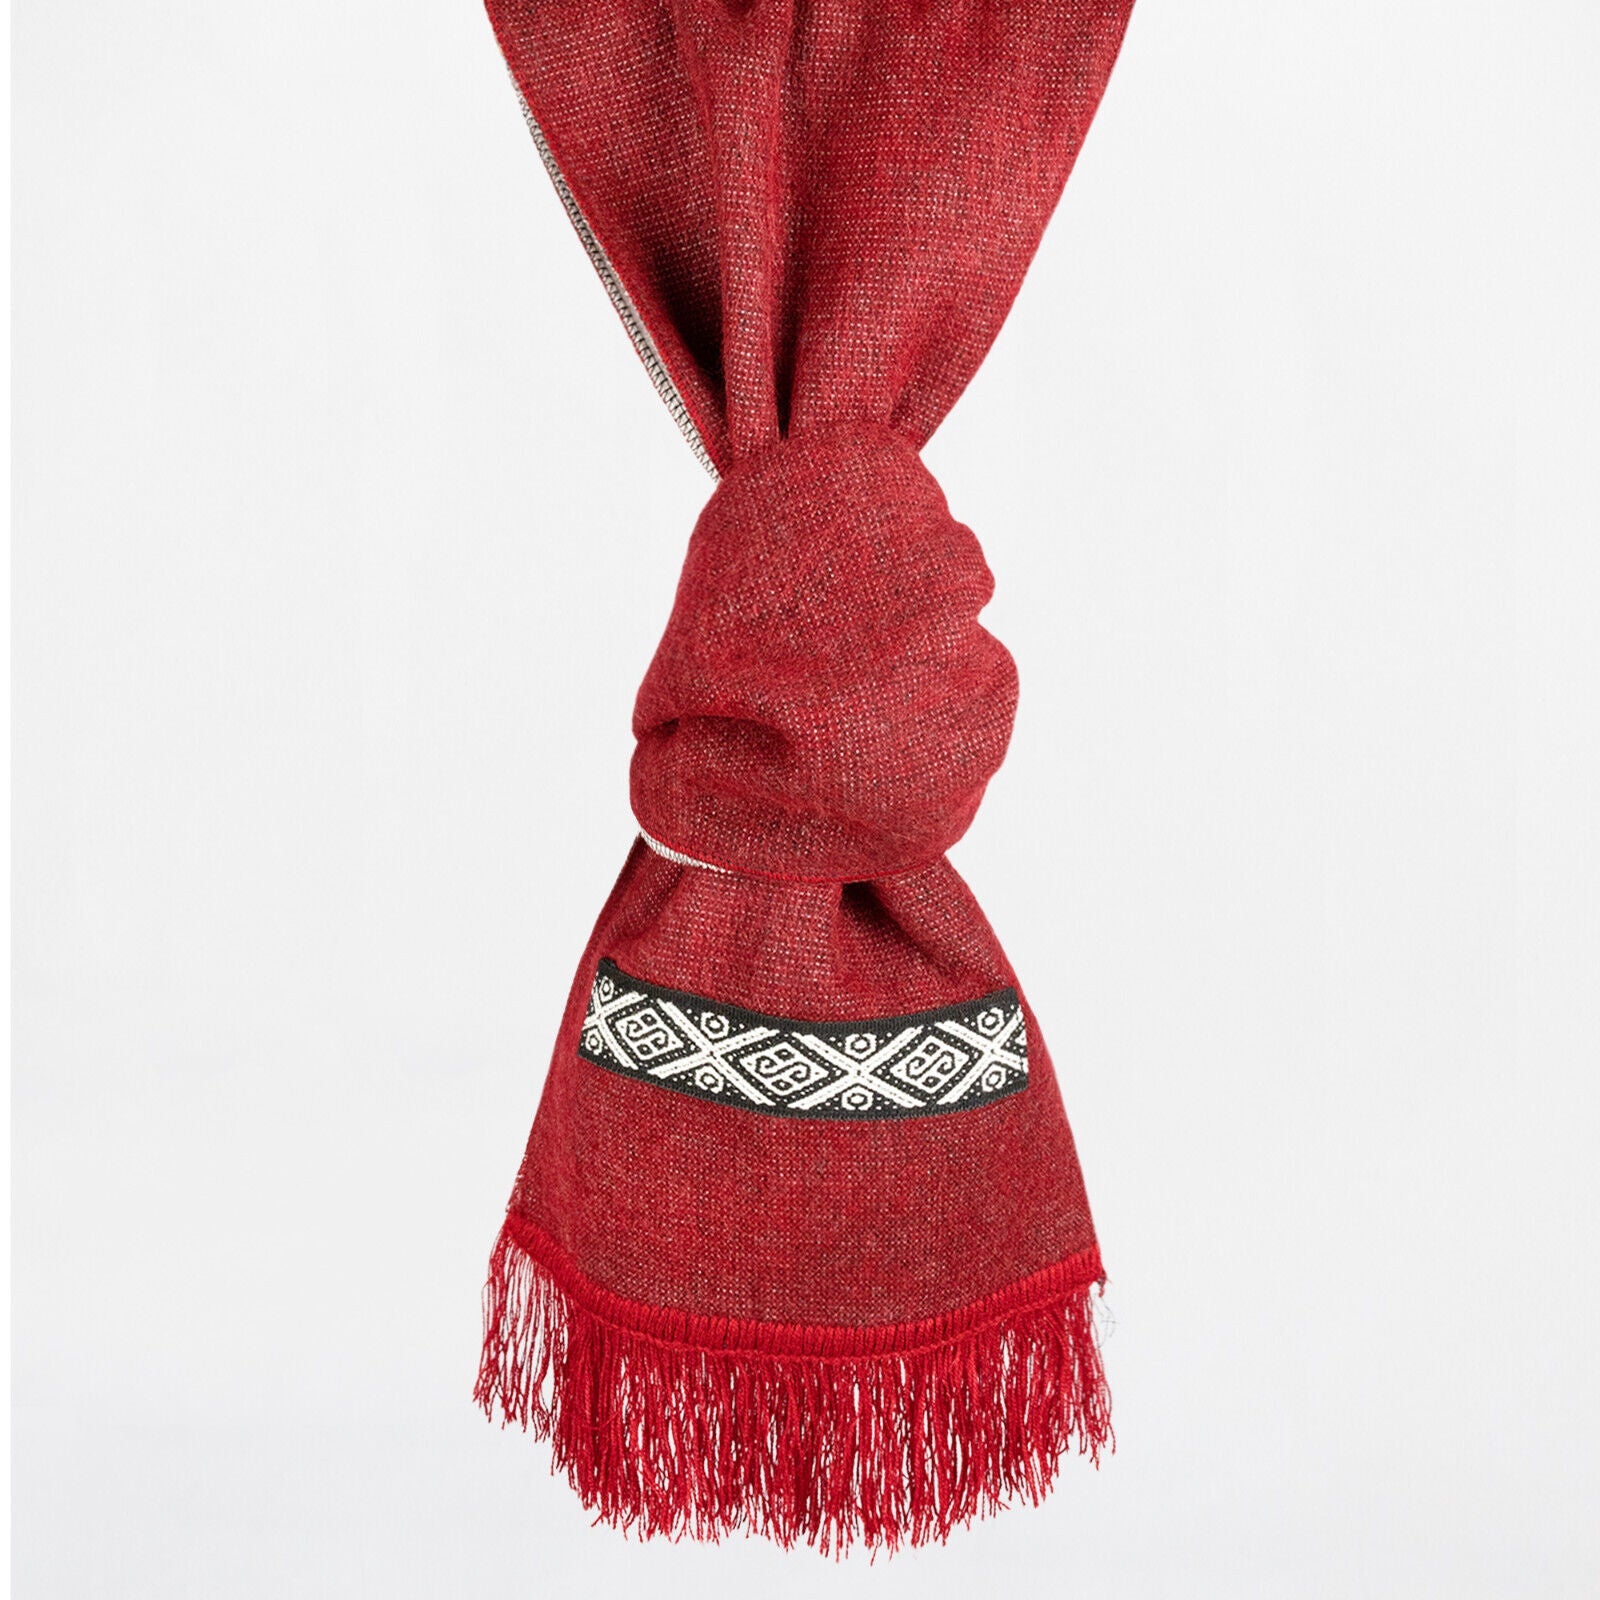 Alicia's FREE RED SCARF - Dual-Tone, Brushed Finish, Embroidery - Andean Elegance